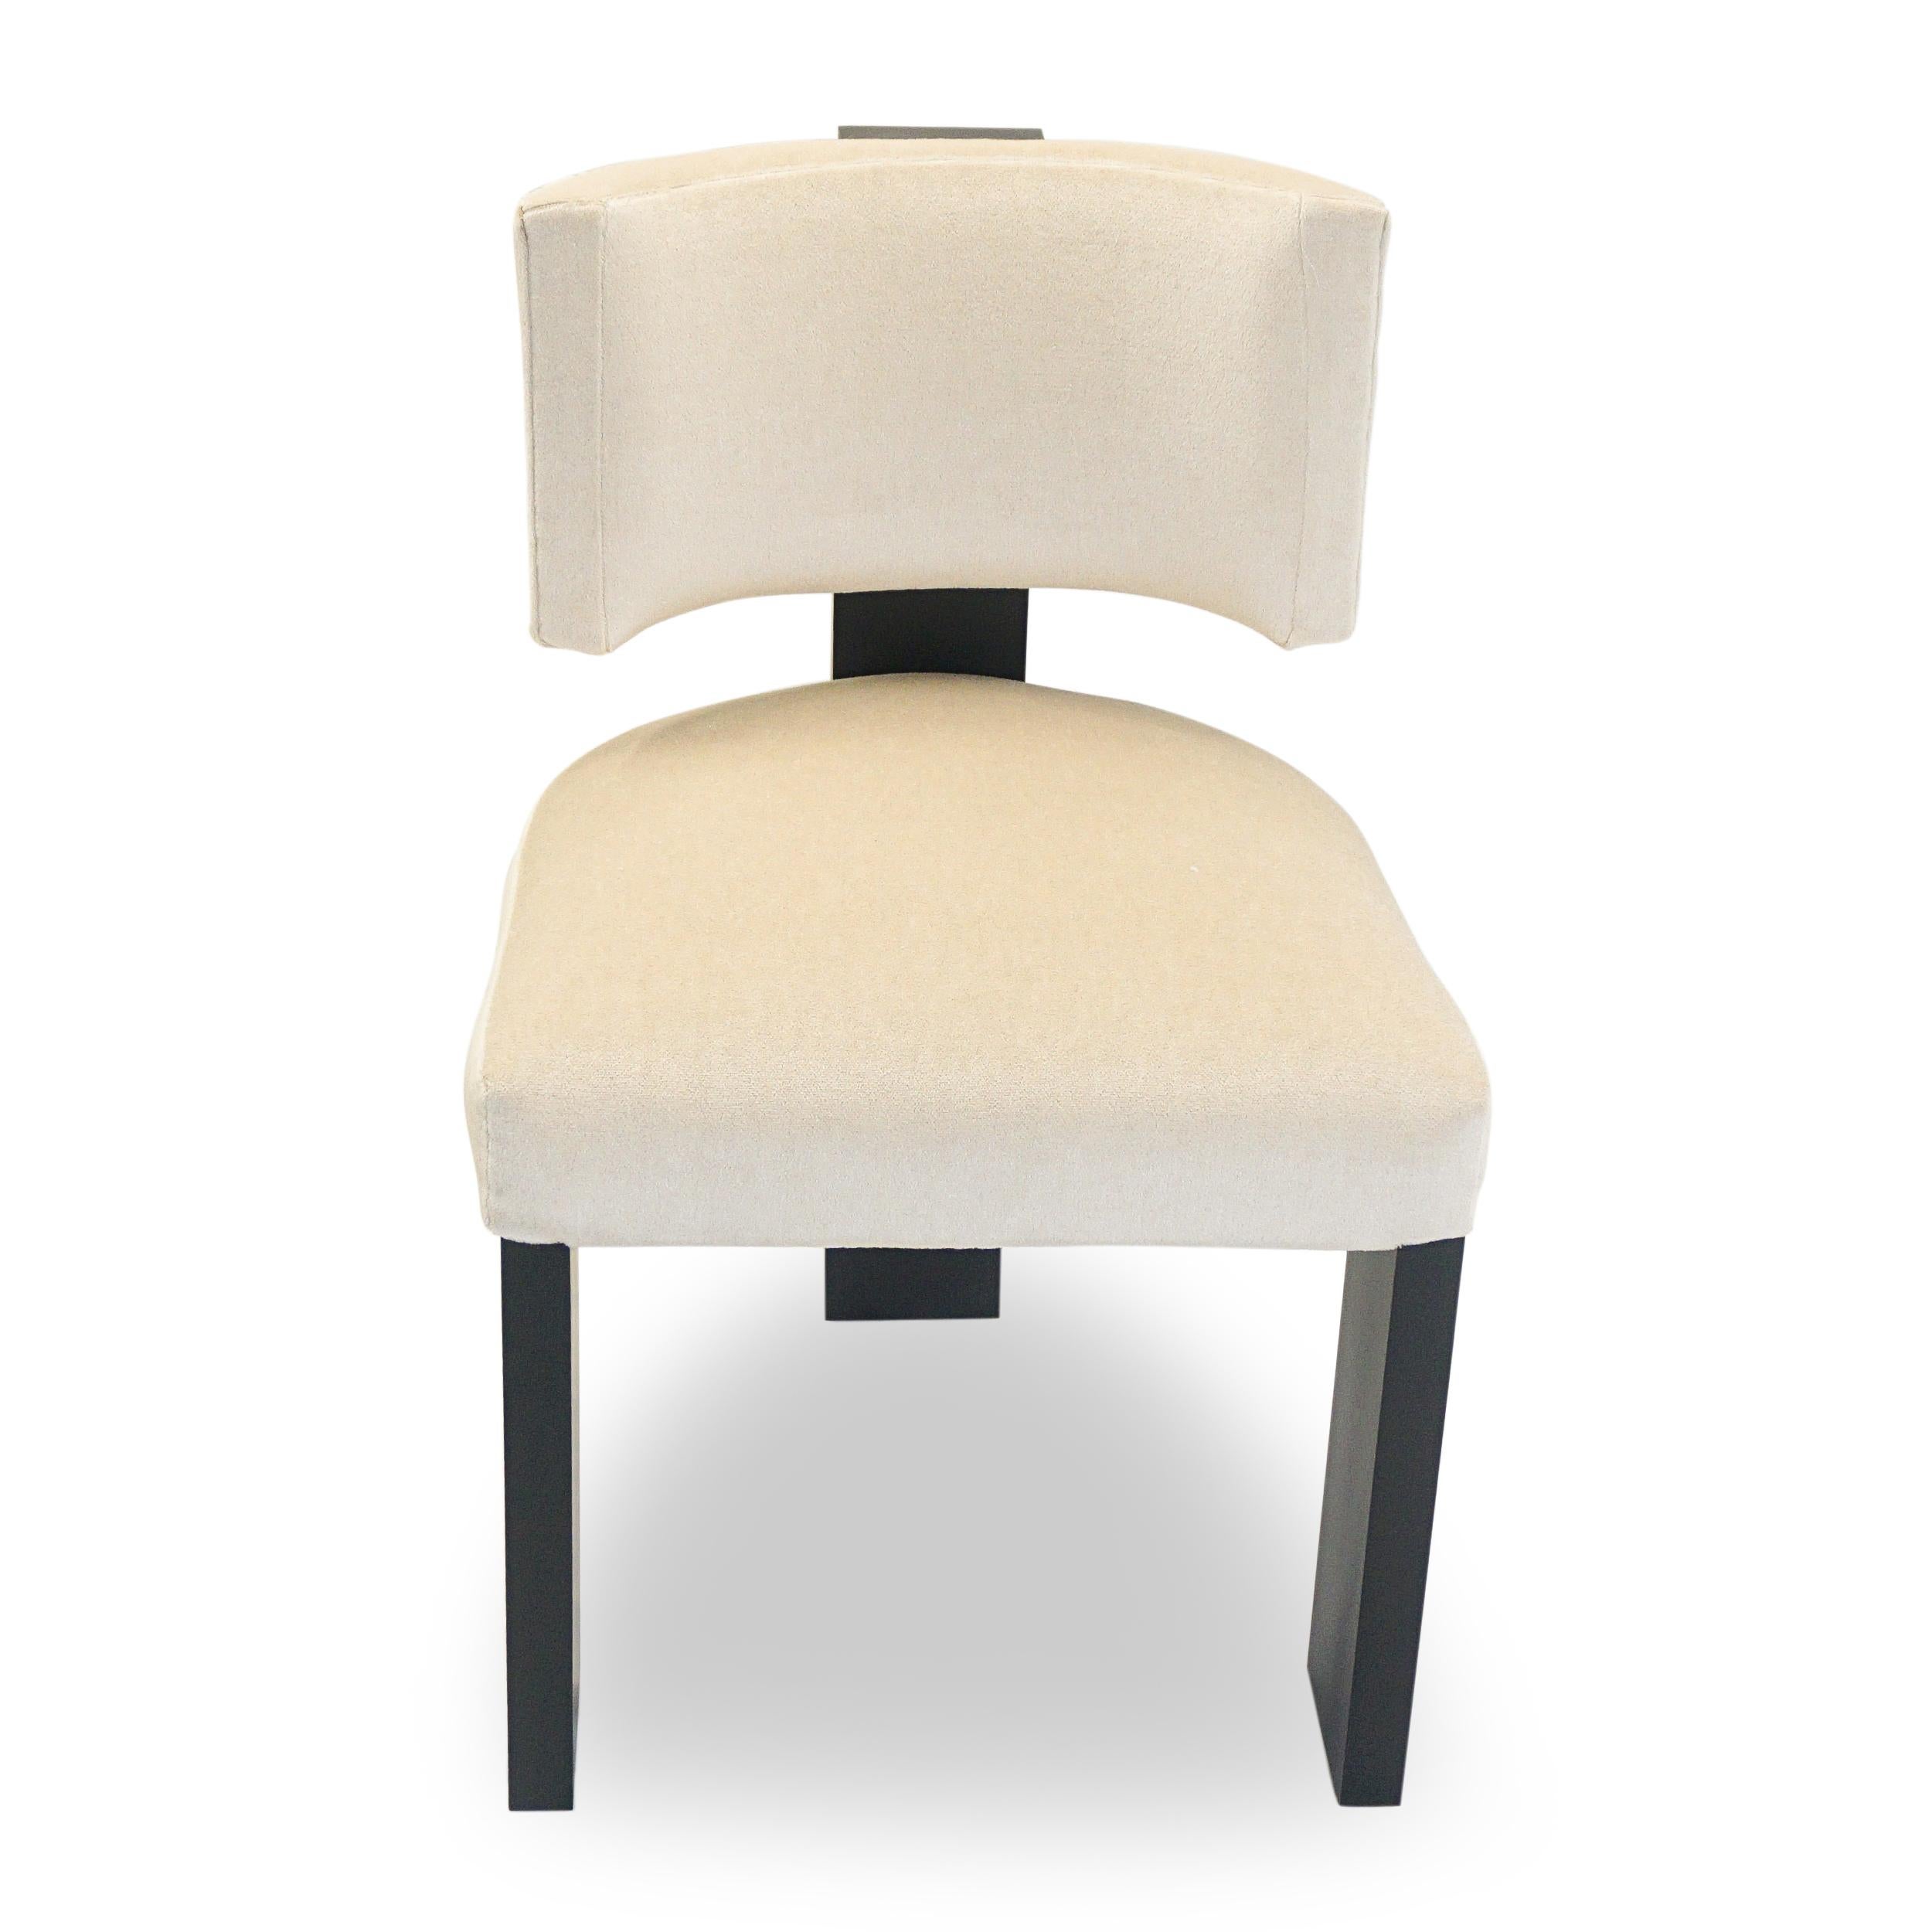 Modern three legged dining chair with blackened hard maple legs. The curved back cups just beneath most shoulder blades and the chair encourages good posture. The back can be pitched if desired for a more relaxed sit. The chair is shown in beige